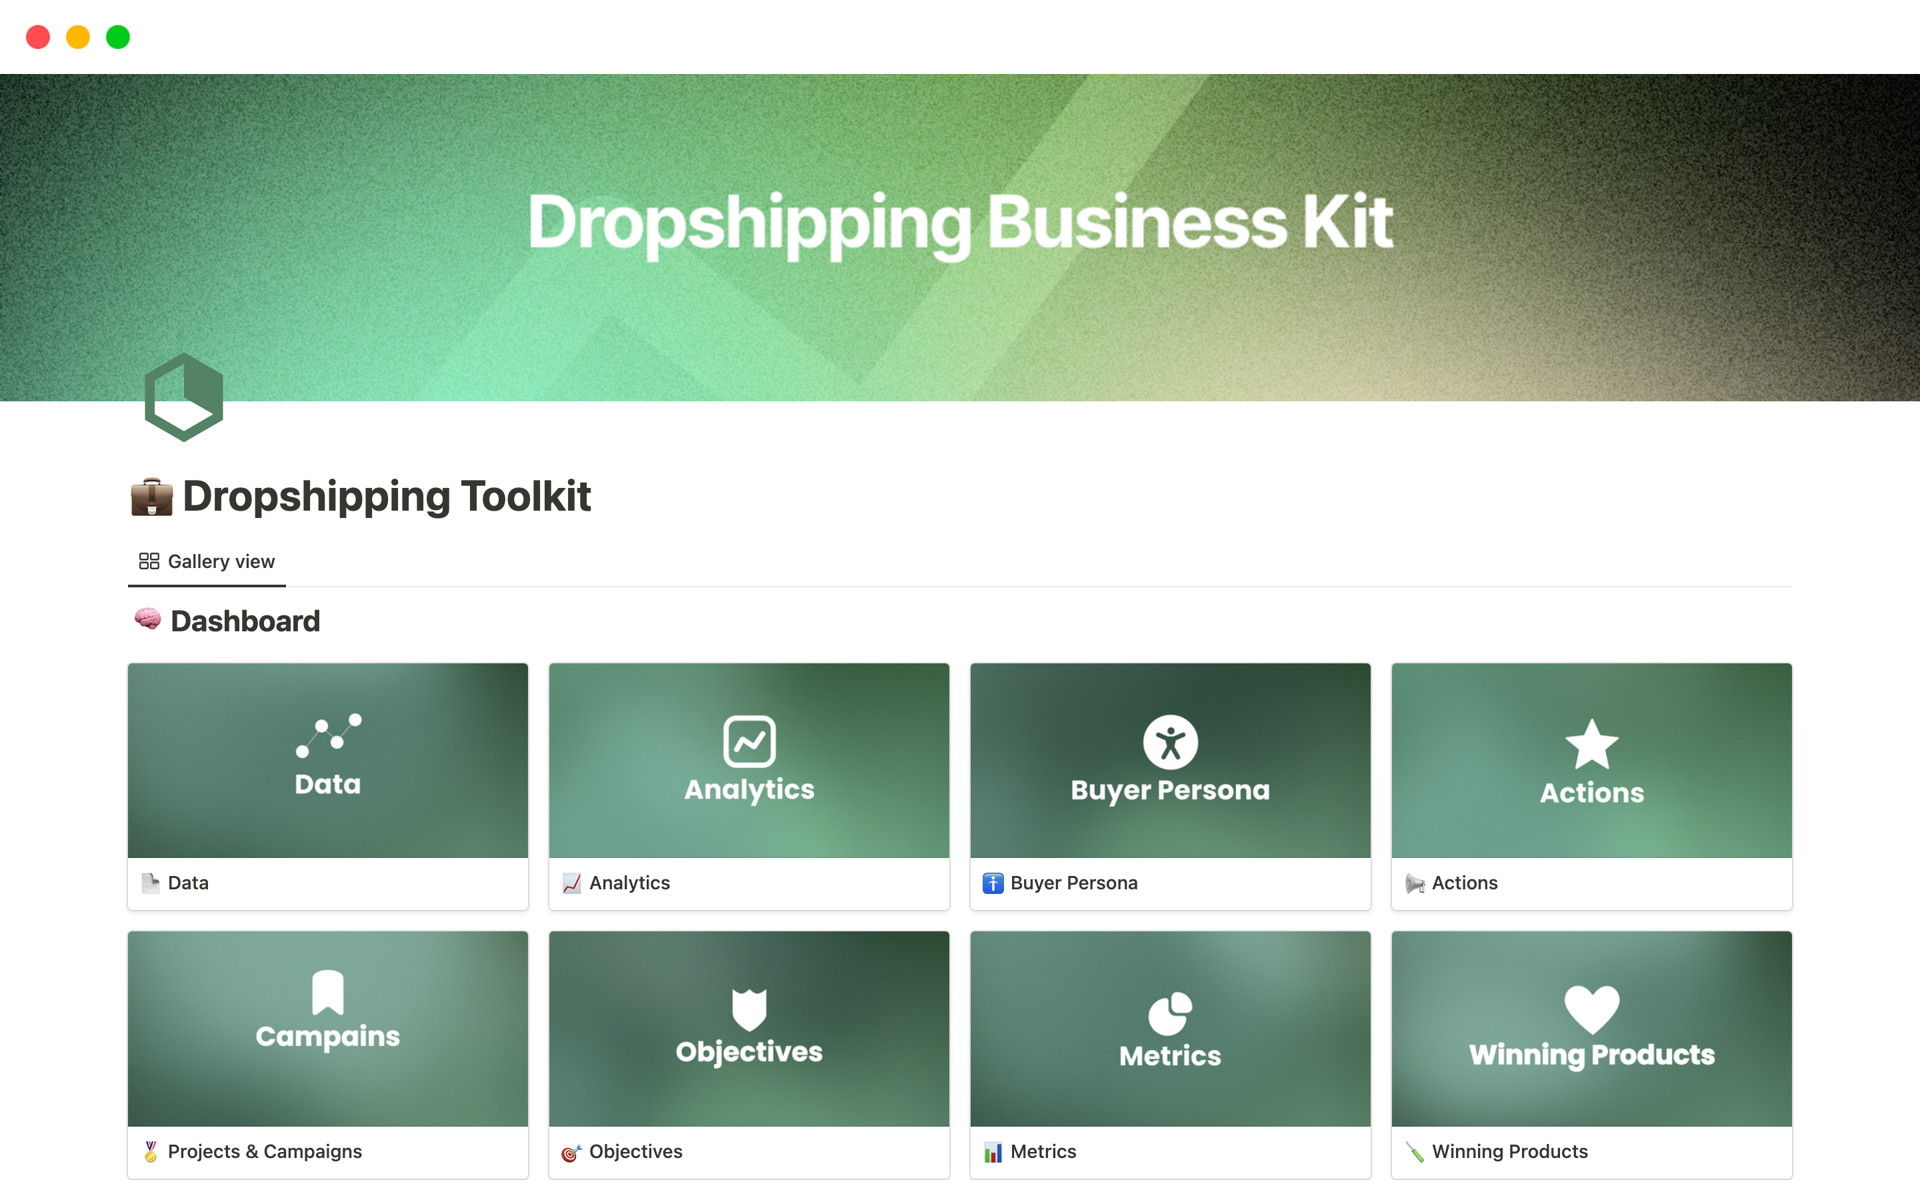 🚀 Turbocharge Your dropshipping business